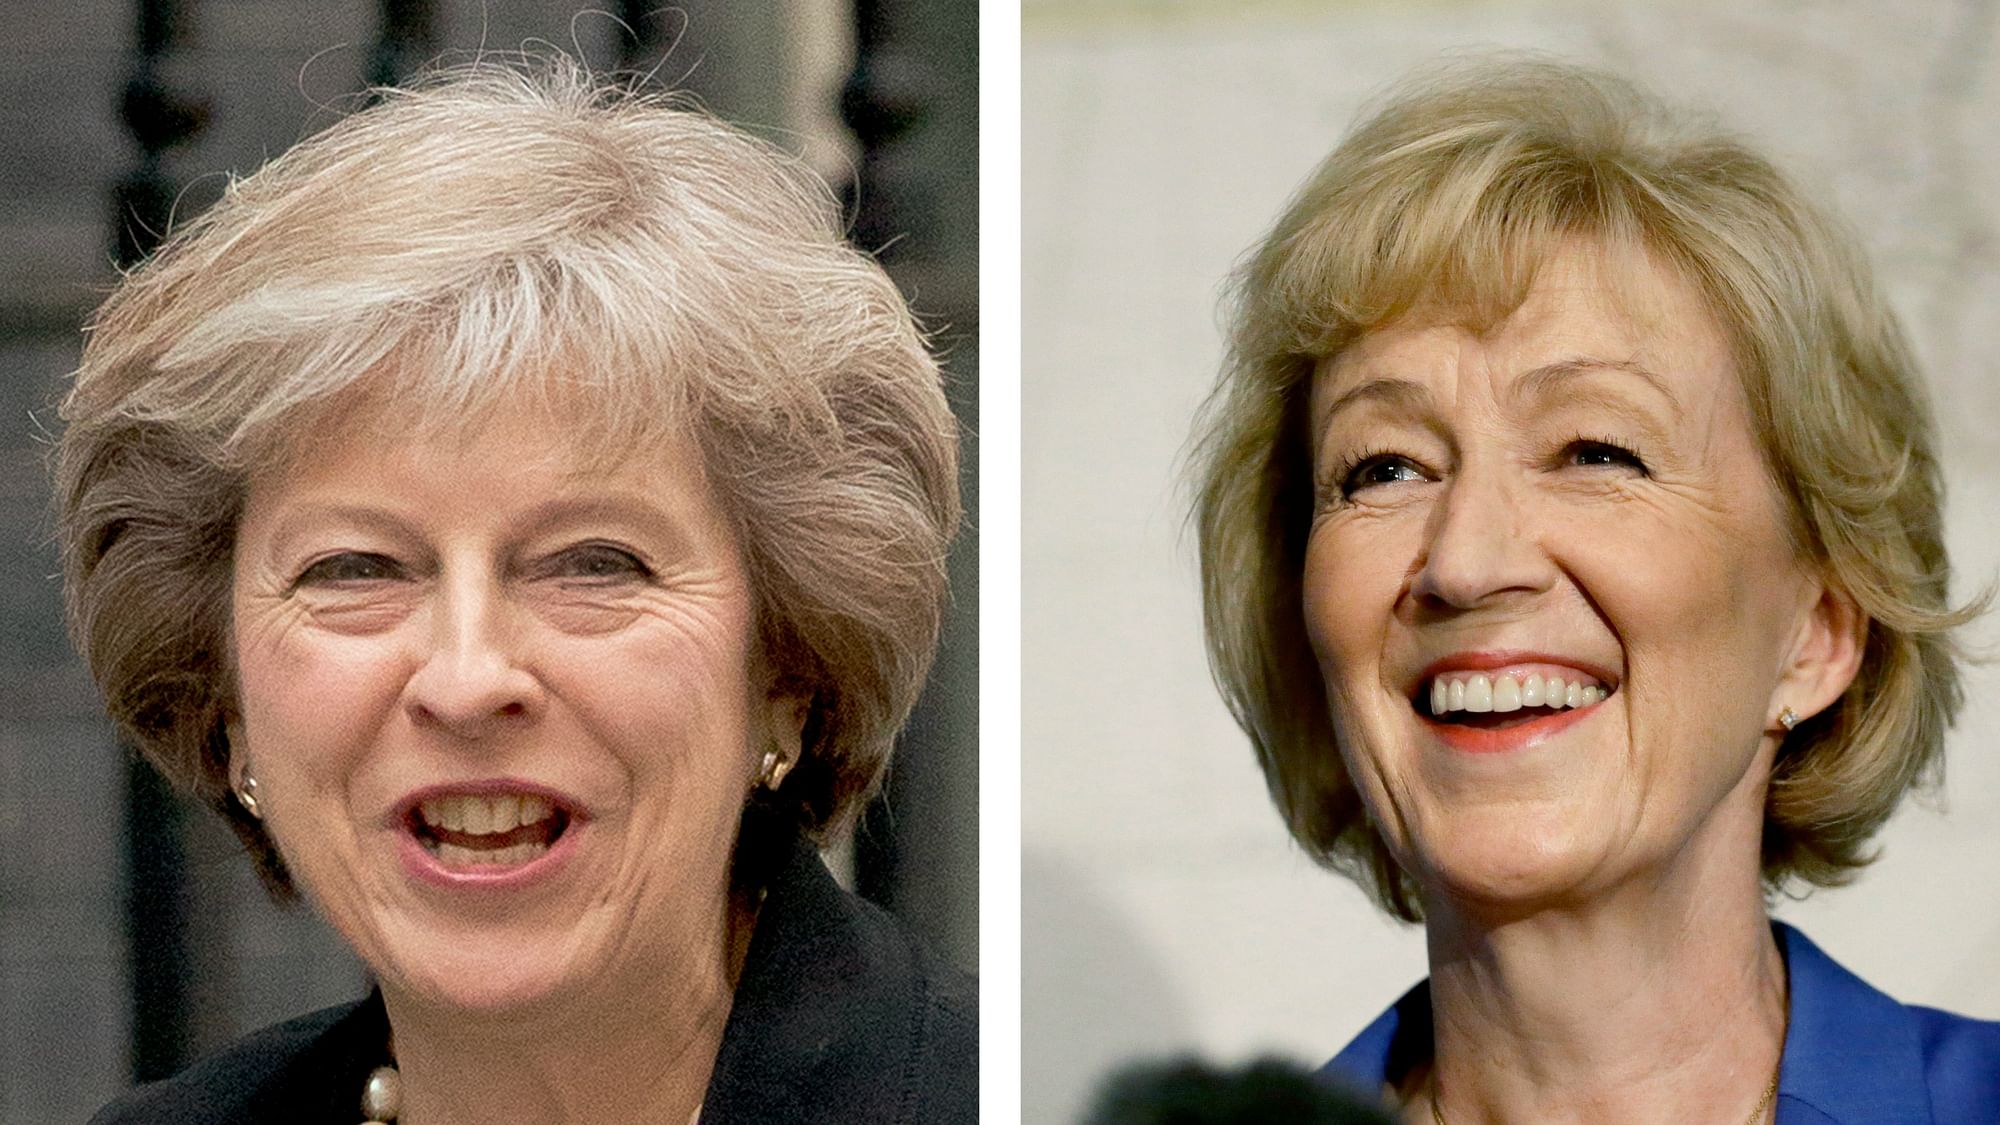 

The two contenders to become the leader of the Conservative Party and assume the post of Britain’s Prime Minister. Theresa May, left, dated 5 July  2016, and Andrea Leadsom, right, dated 4 July  2016. (Photo: AP)